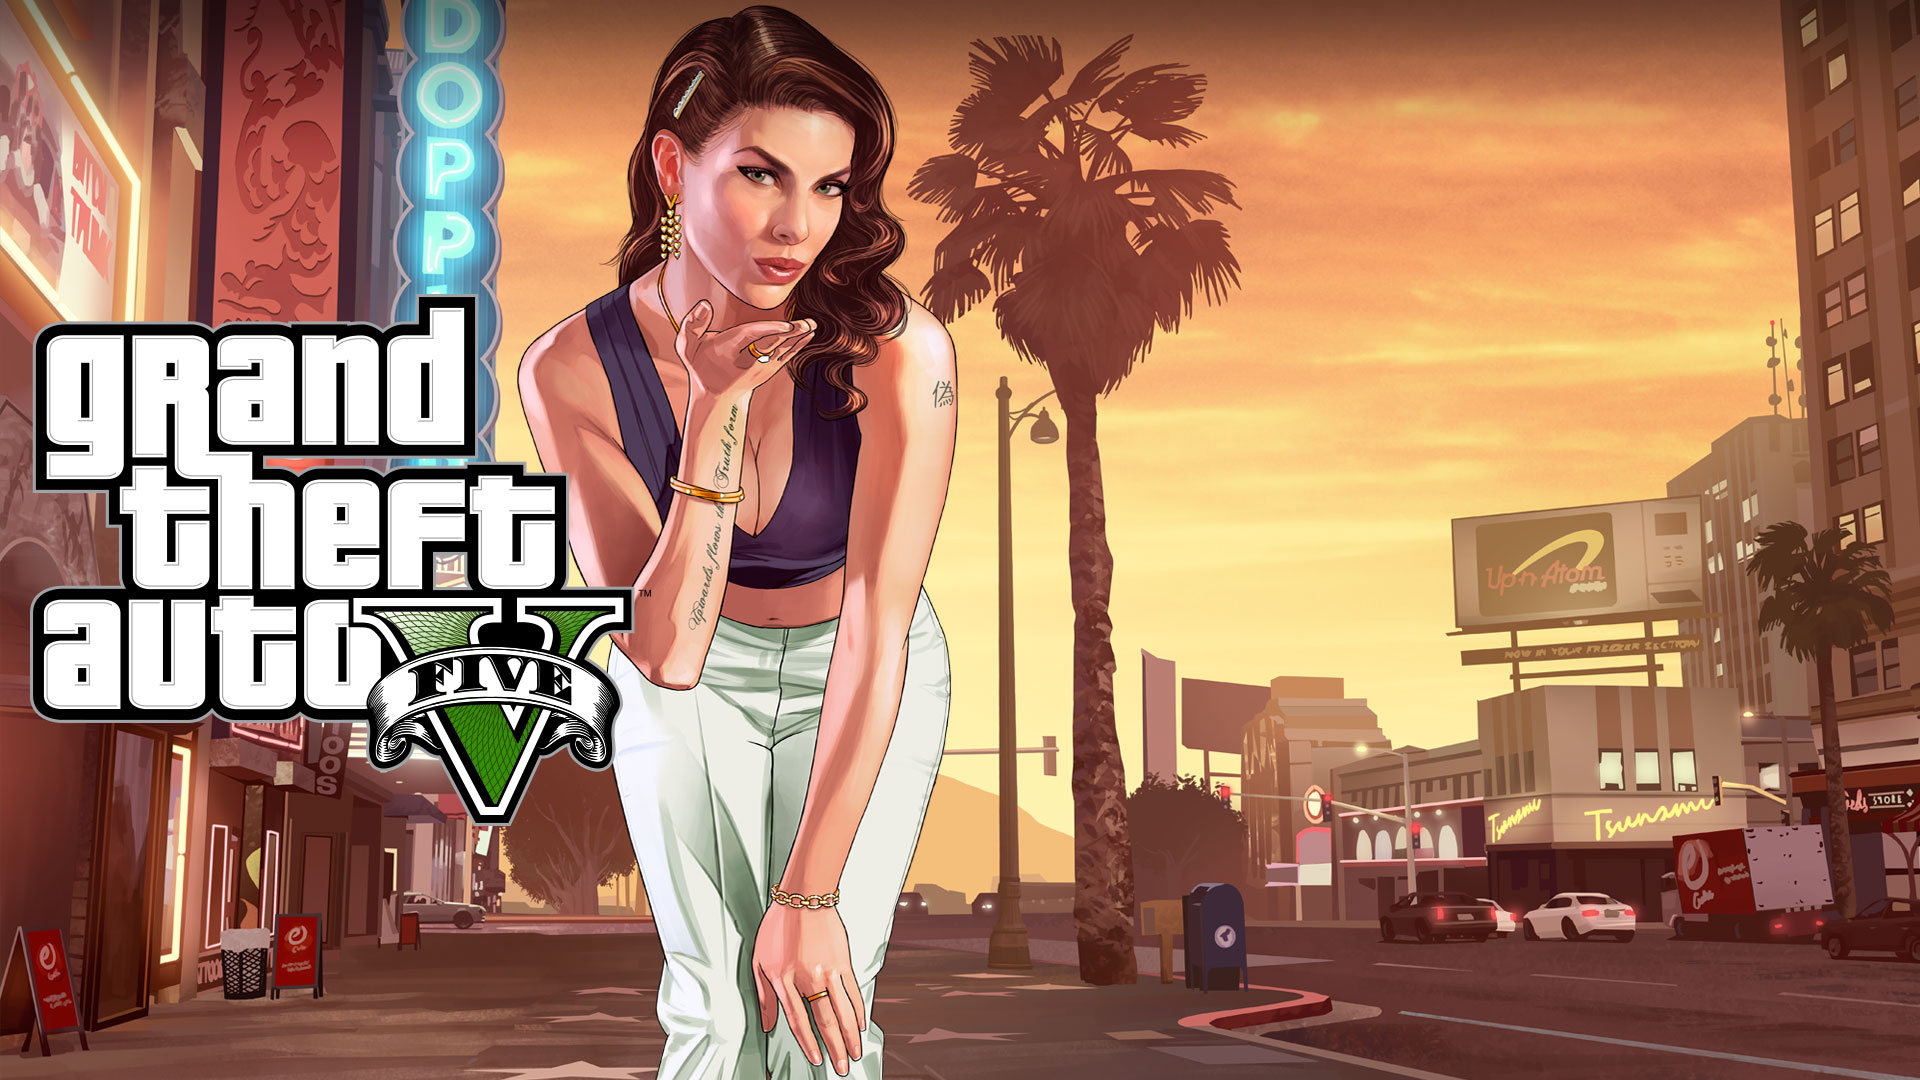 download gta 5 for pc free full version game